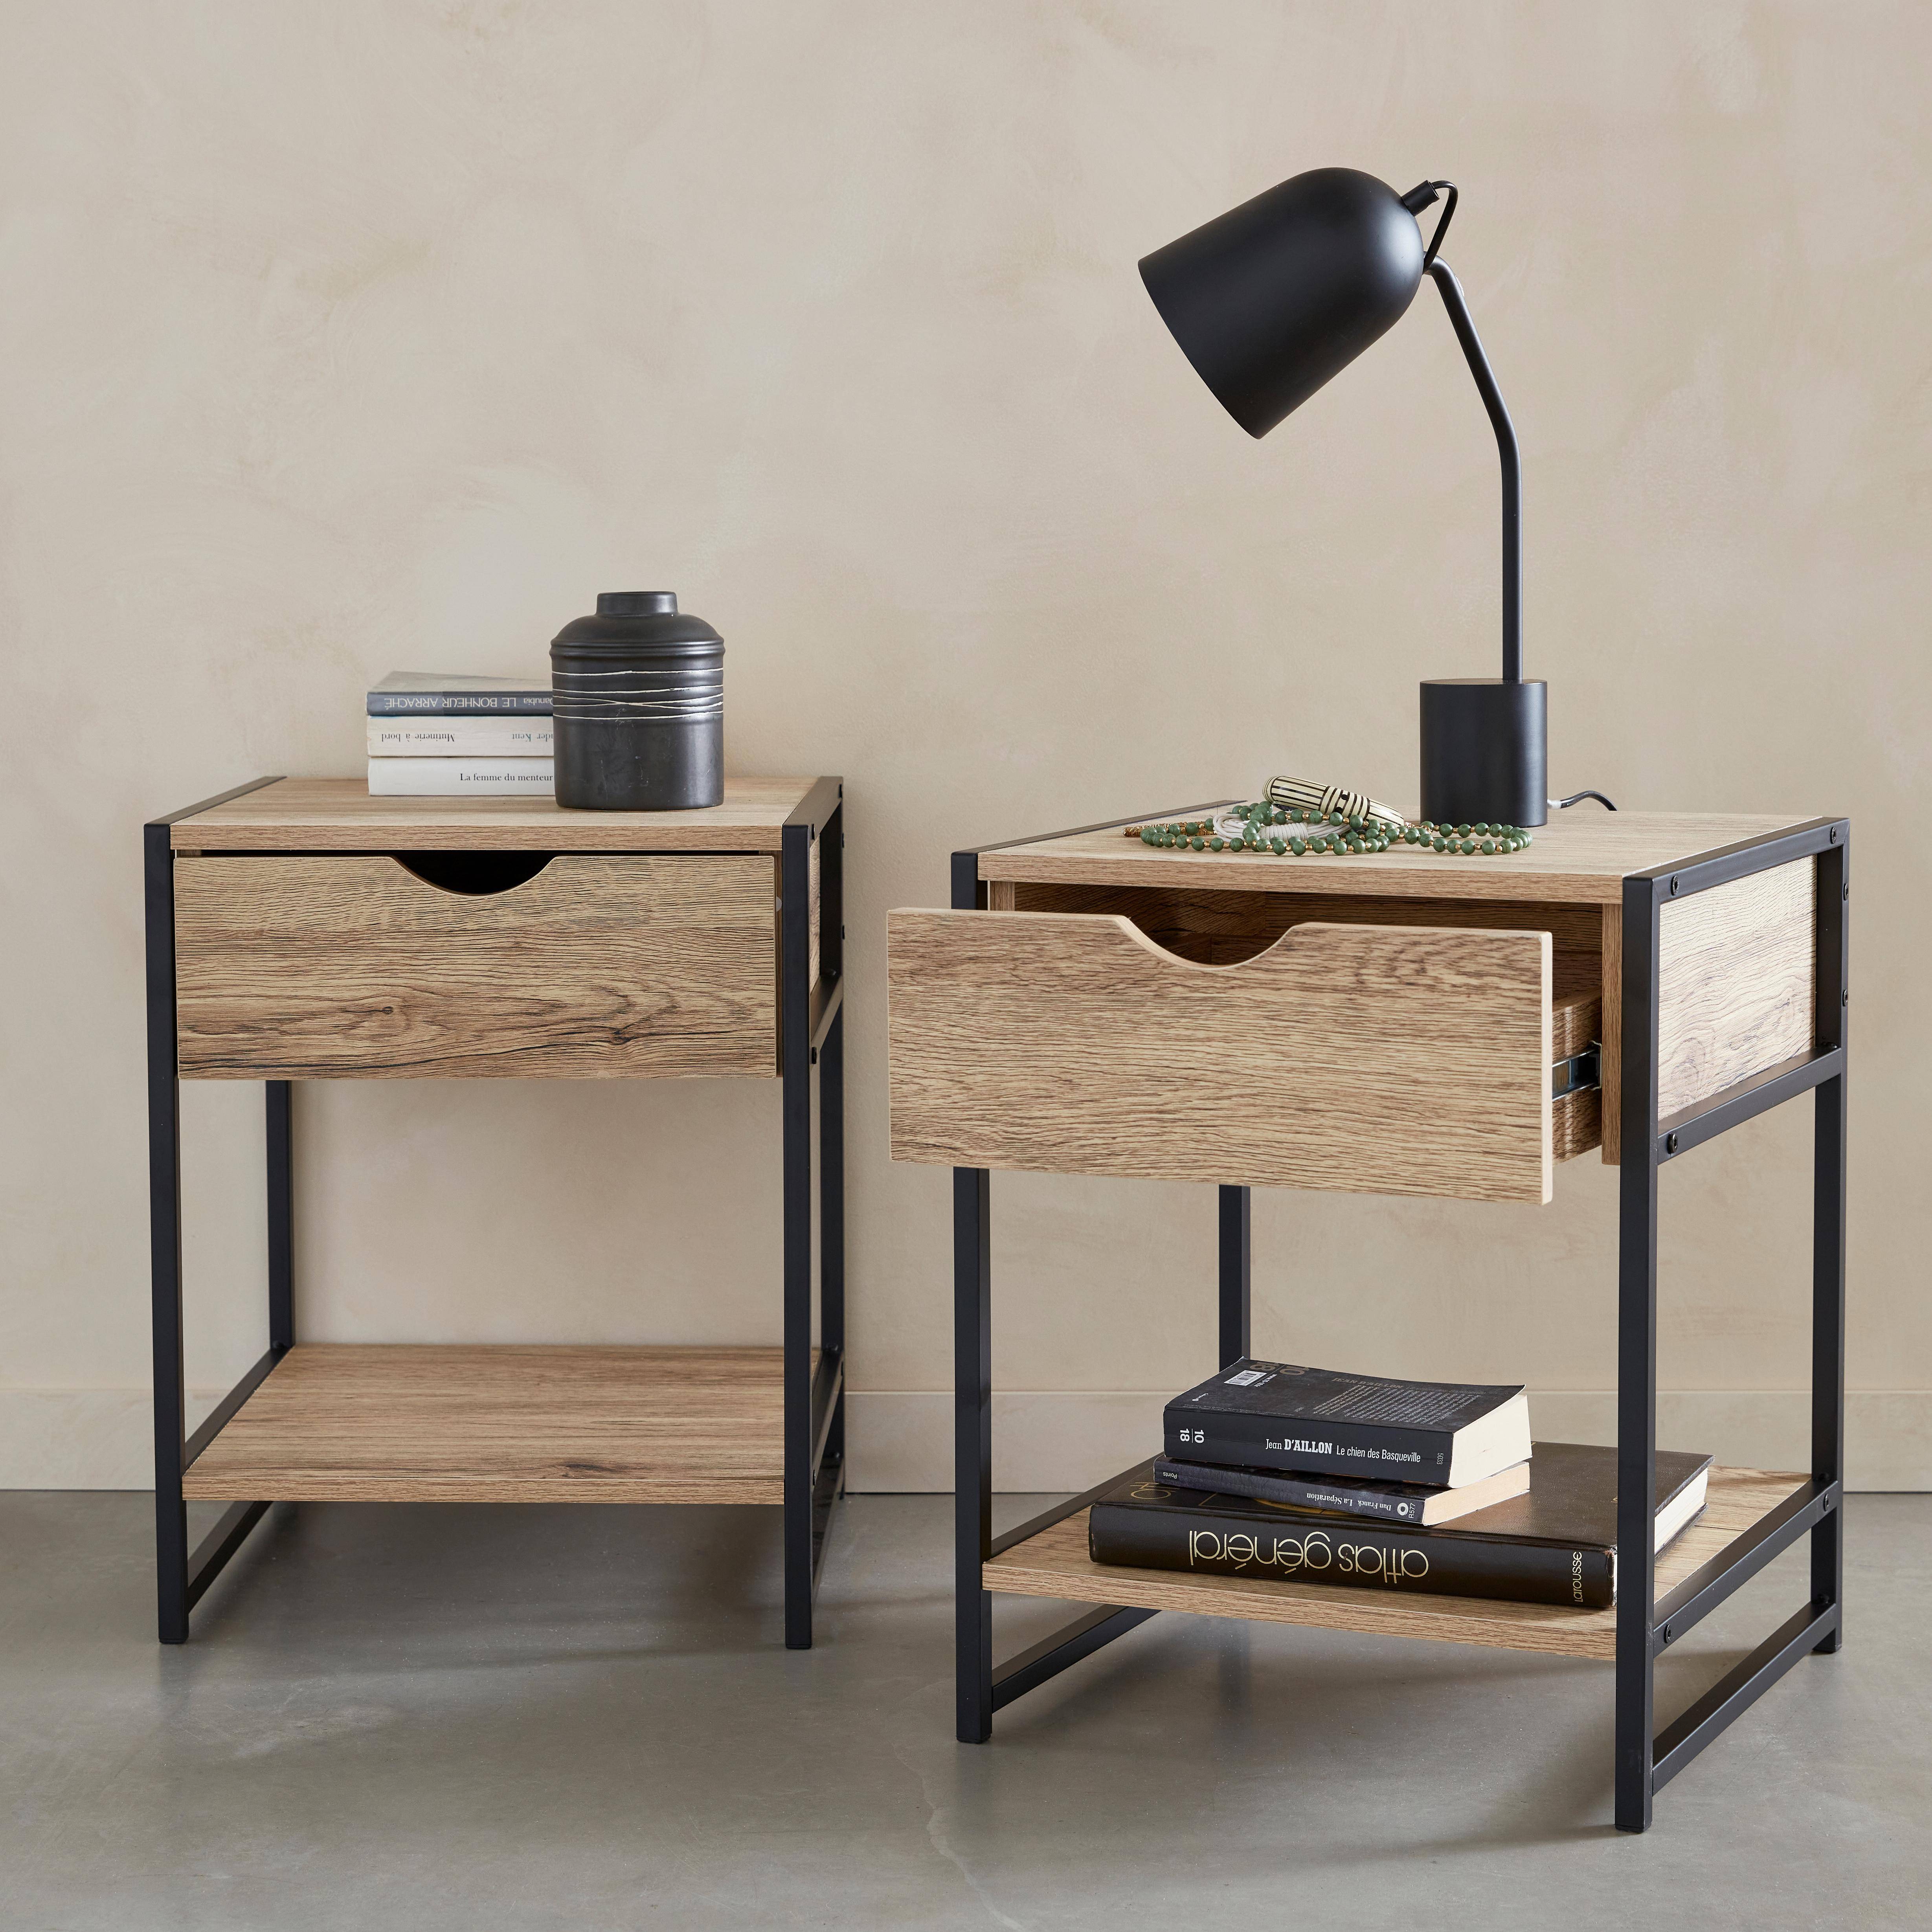 Pair of metal and wood-effect bedside tables with drawer and shelf, 40x40x50cm - Loft Photo2